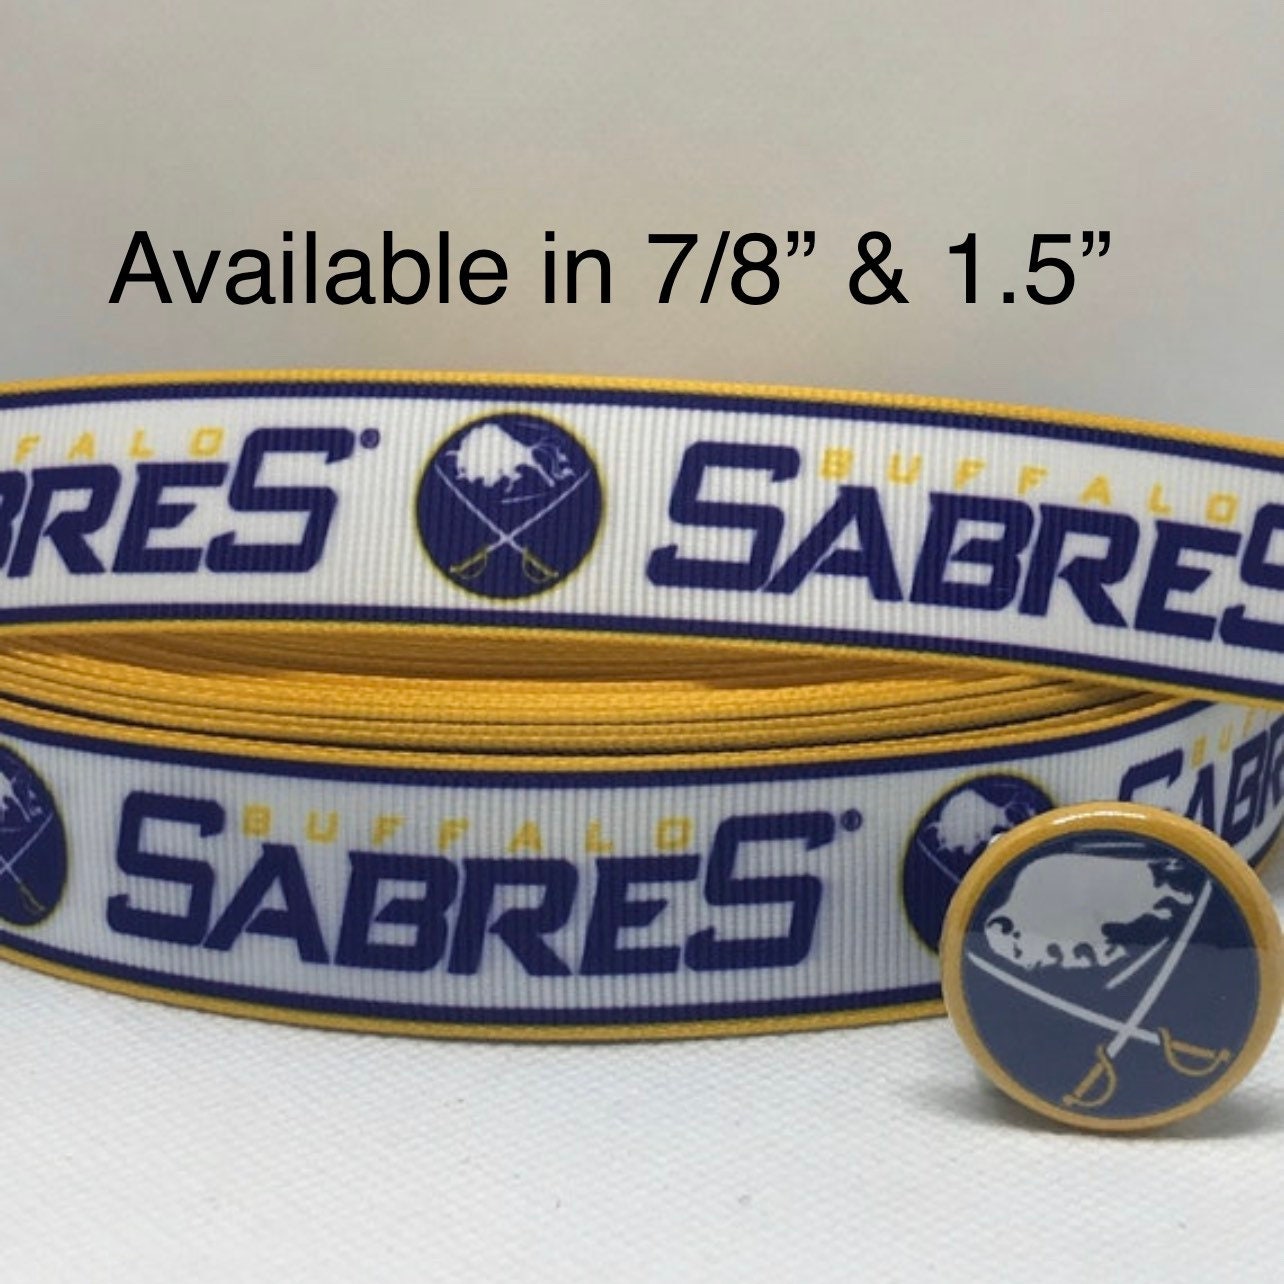 Buffalo Sabres Hoodie 3D Armor Design Sabres Gift - Personalized Gifts:  Family, Sports, Occasions, Trending